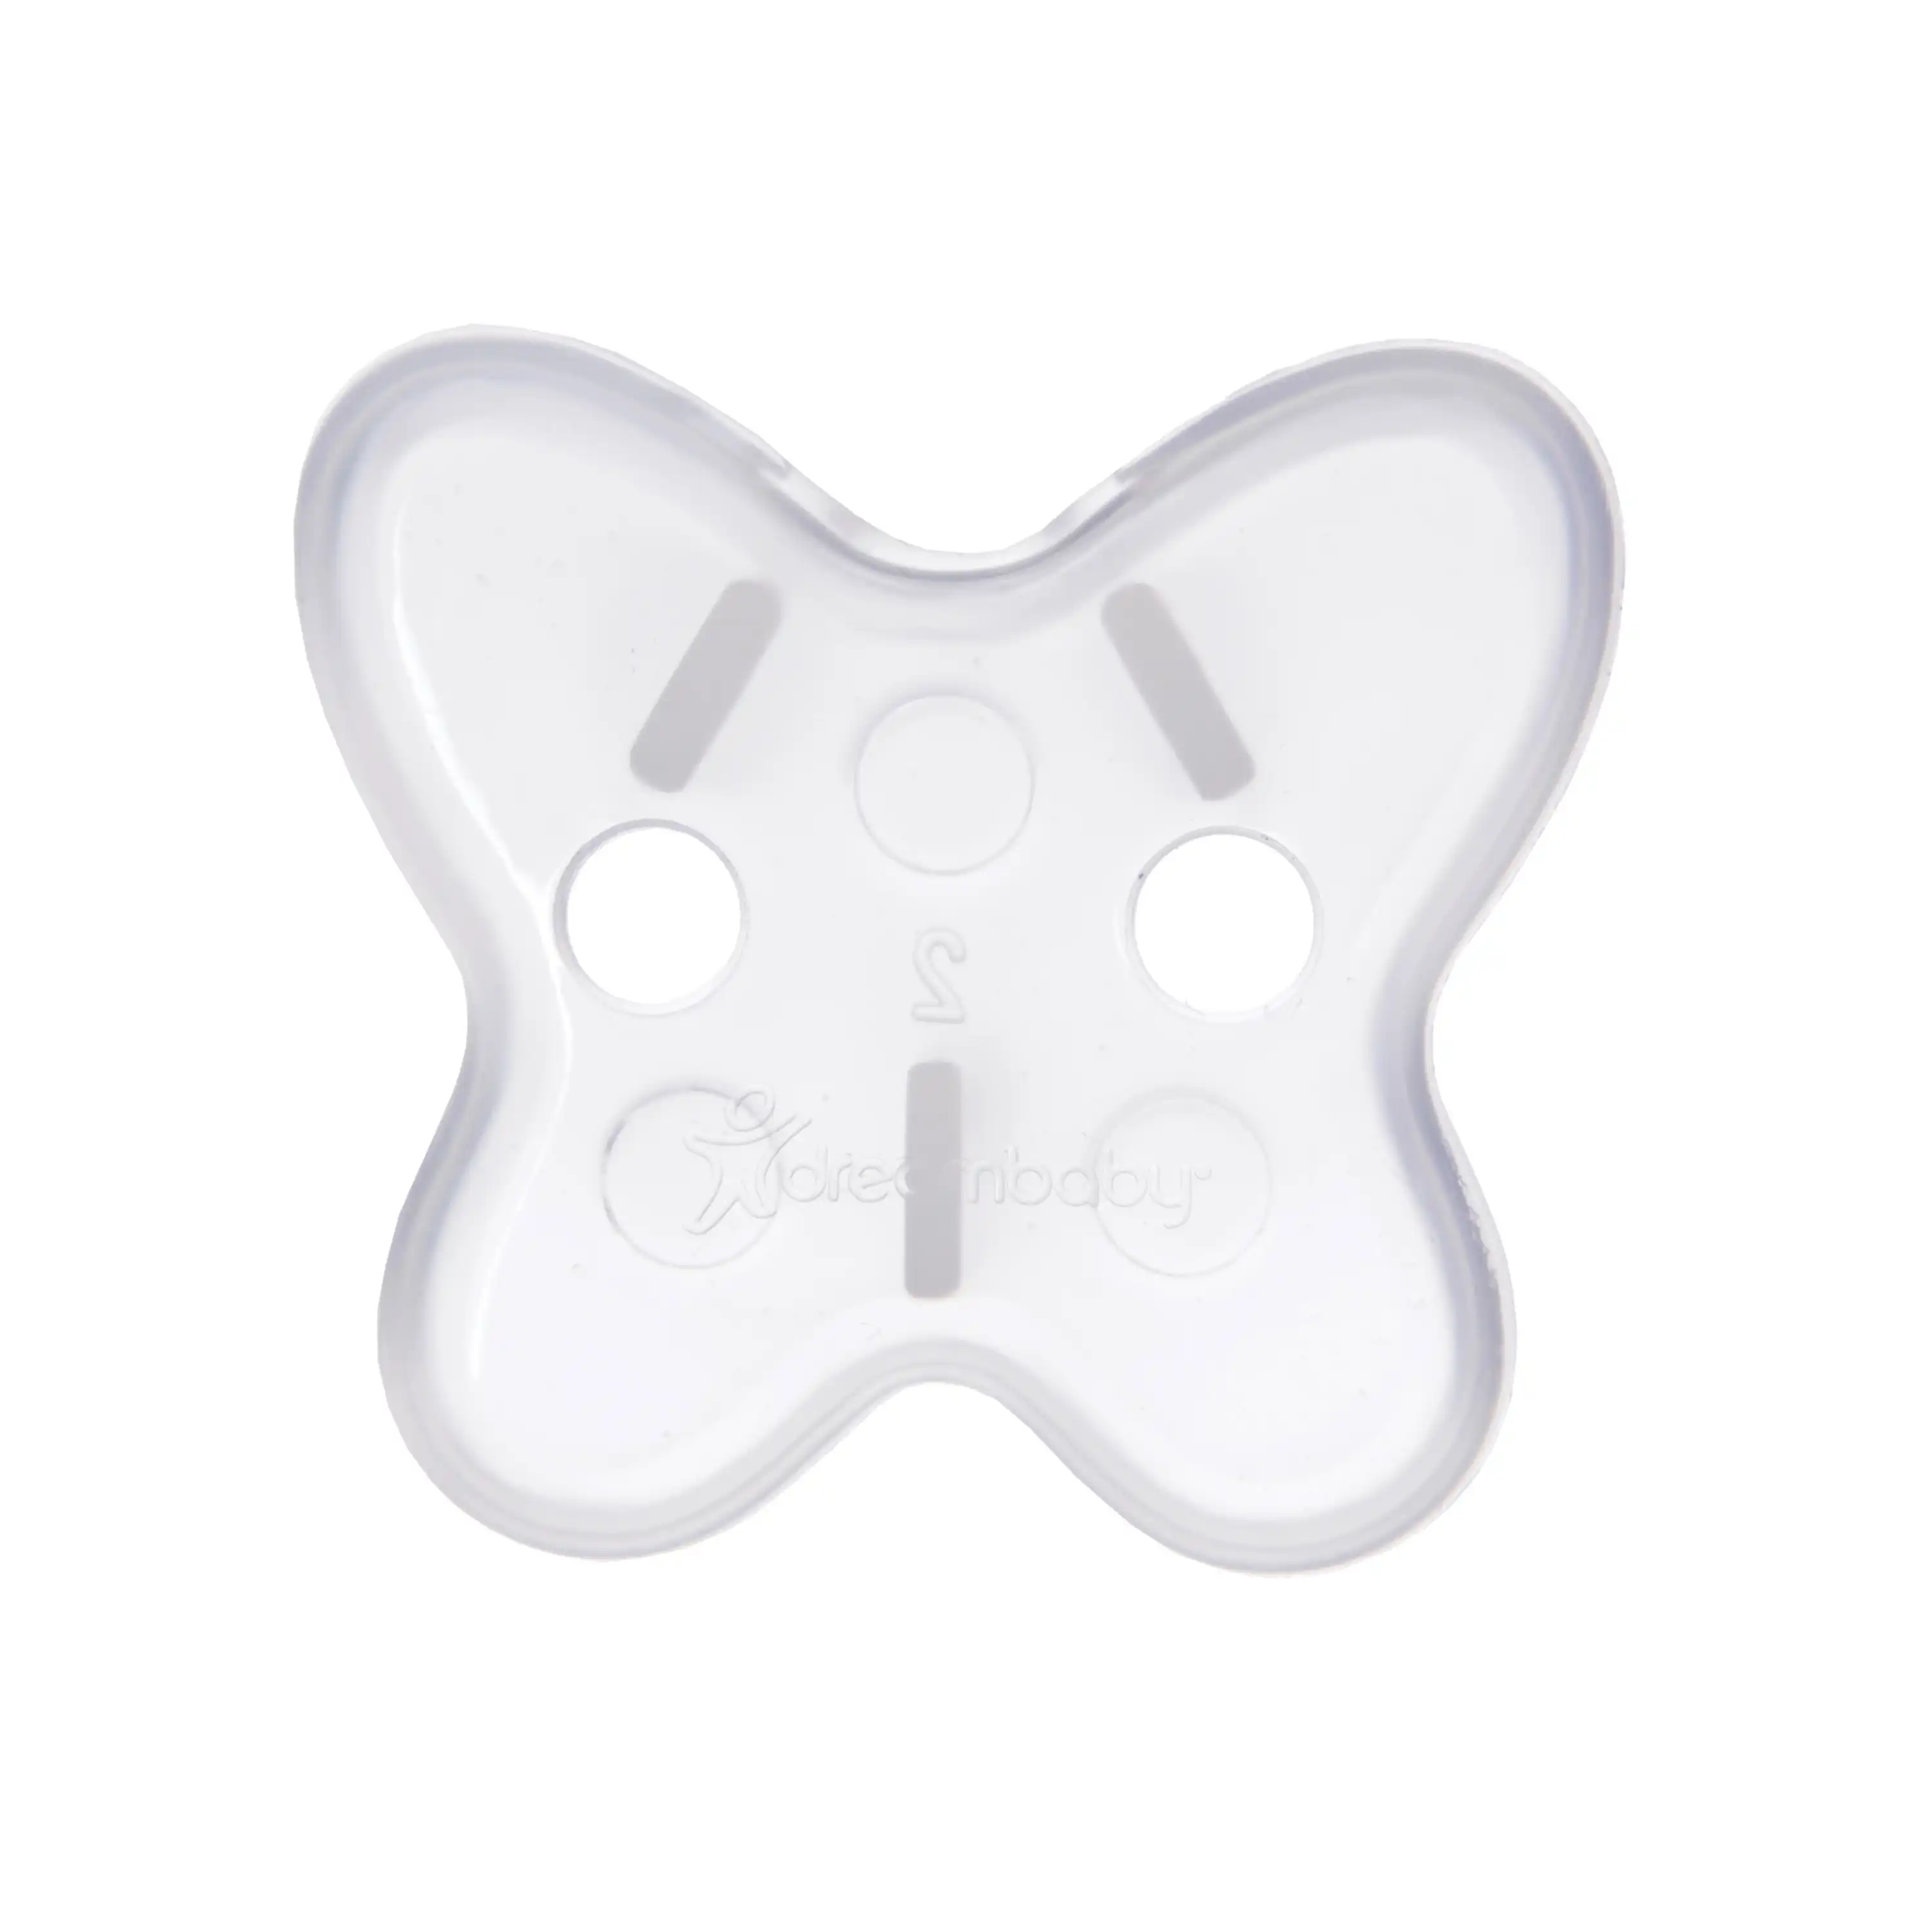 dreambaby Butterfly Outlet Plug 10 Pack